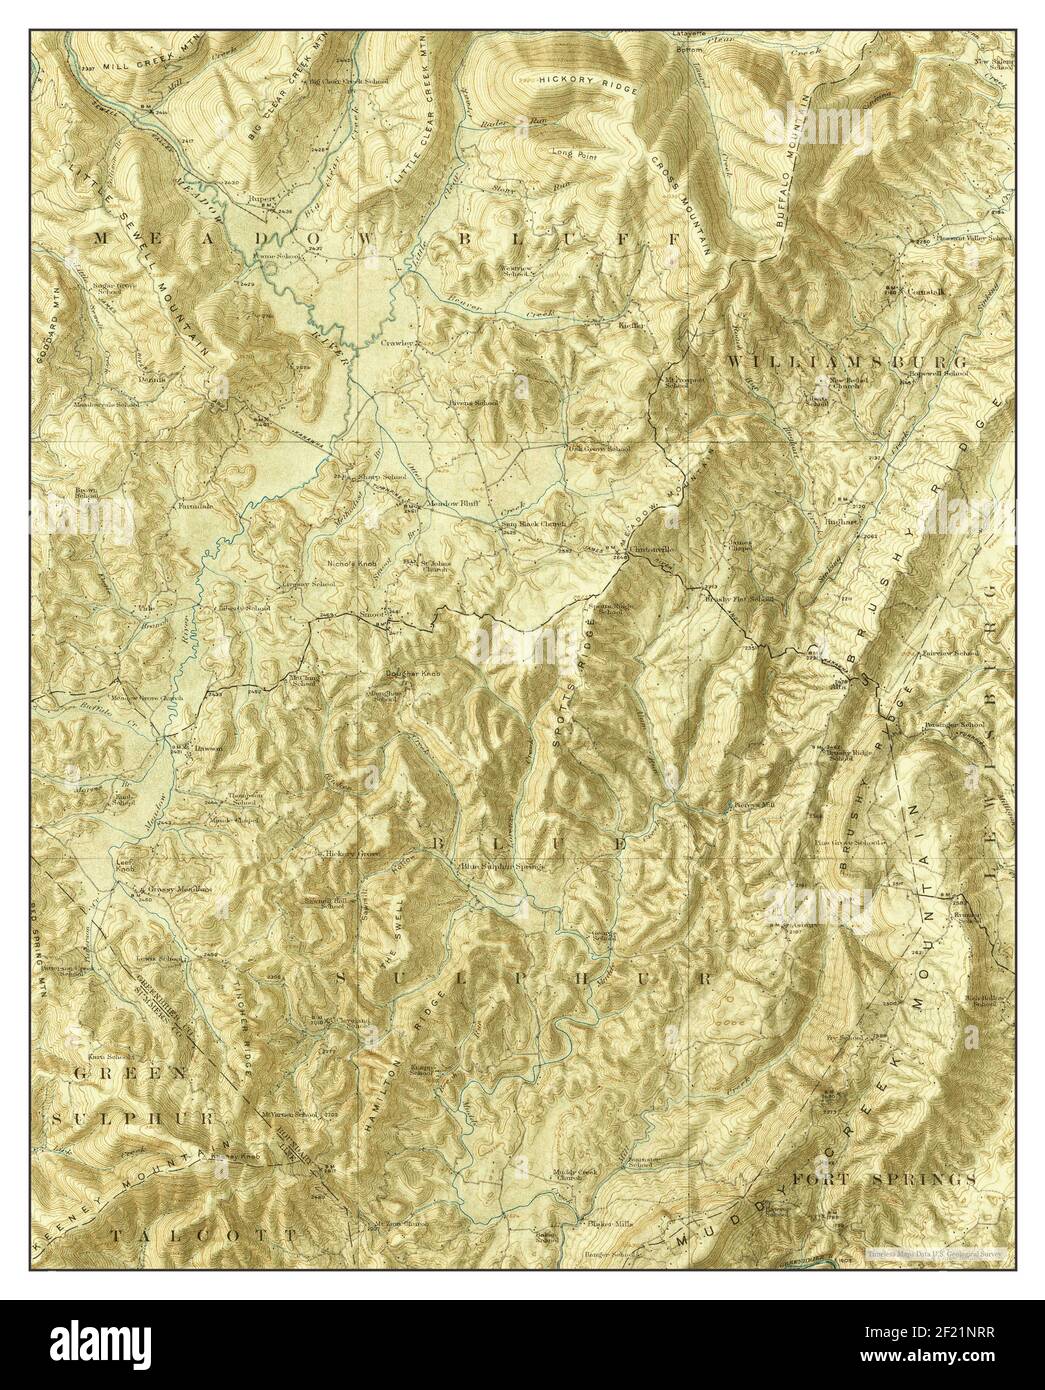 Clintonville, West Virginia, map 1923, 1:62500, United States of America by Timeless Maps, data U.S. Geological Survey Stock Photo